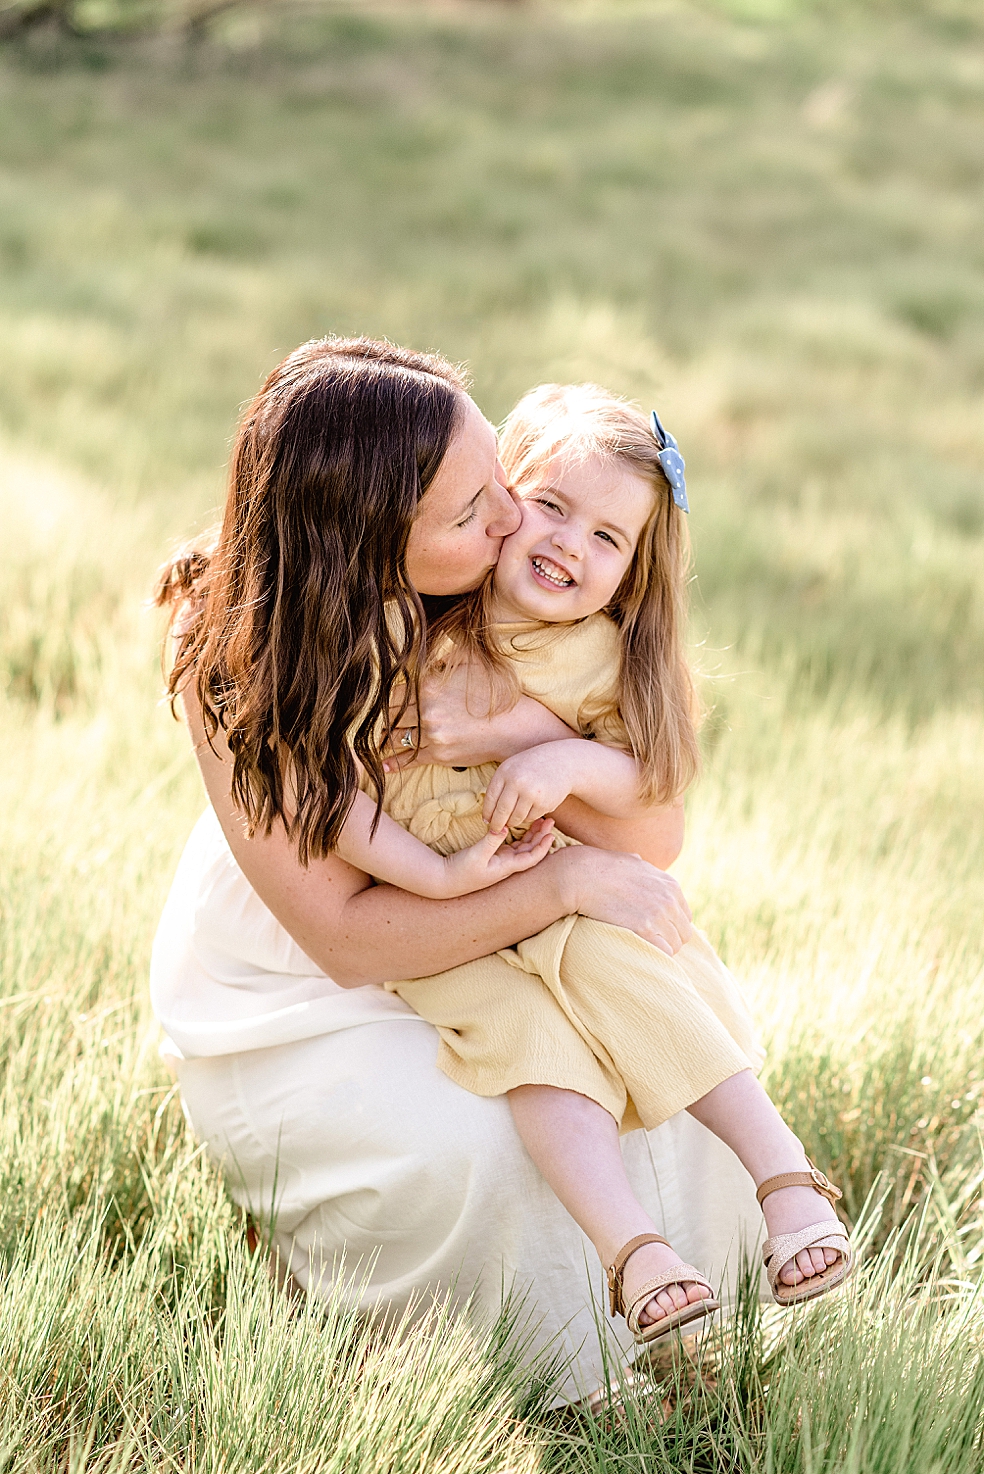 Mom kissing her toddler daughter in yellow | Photo by Jessica Lee Photography